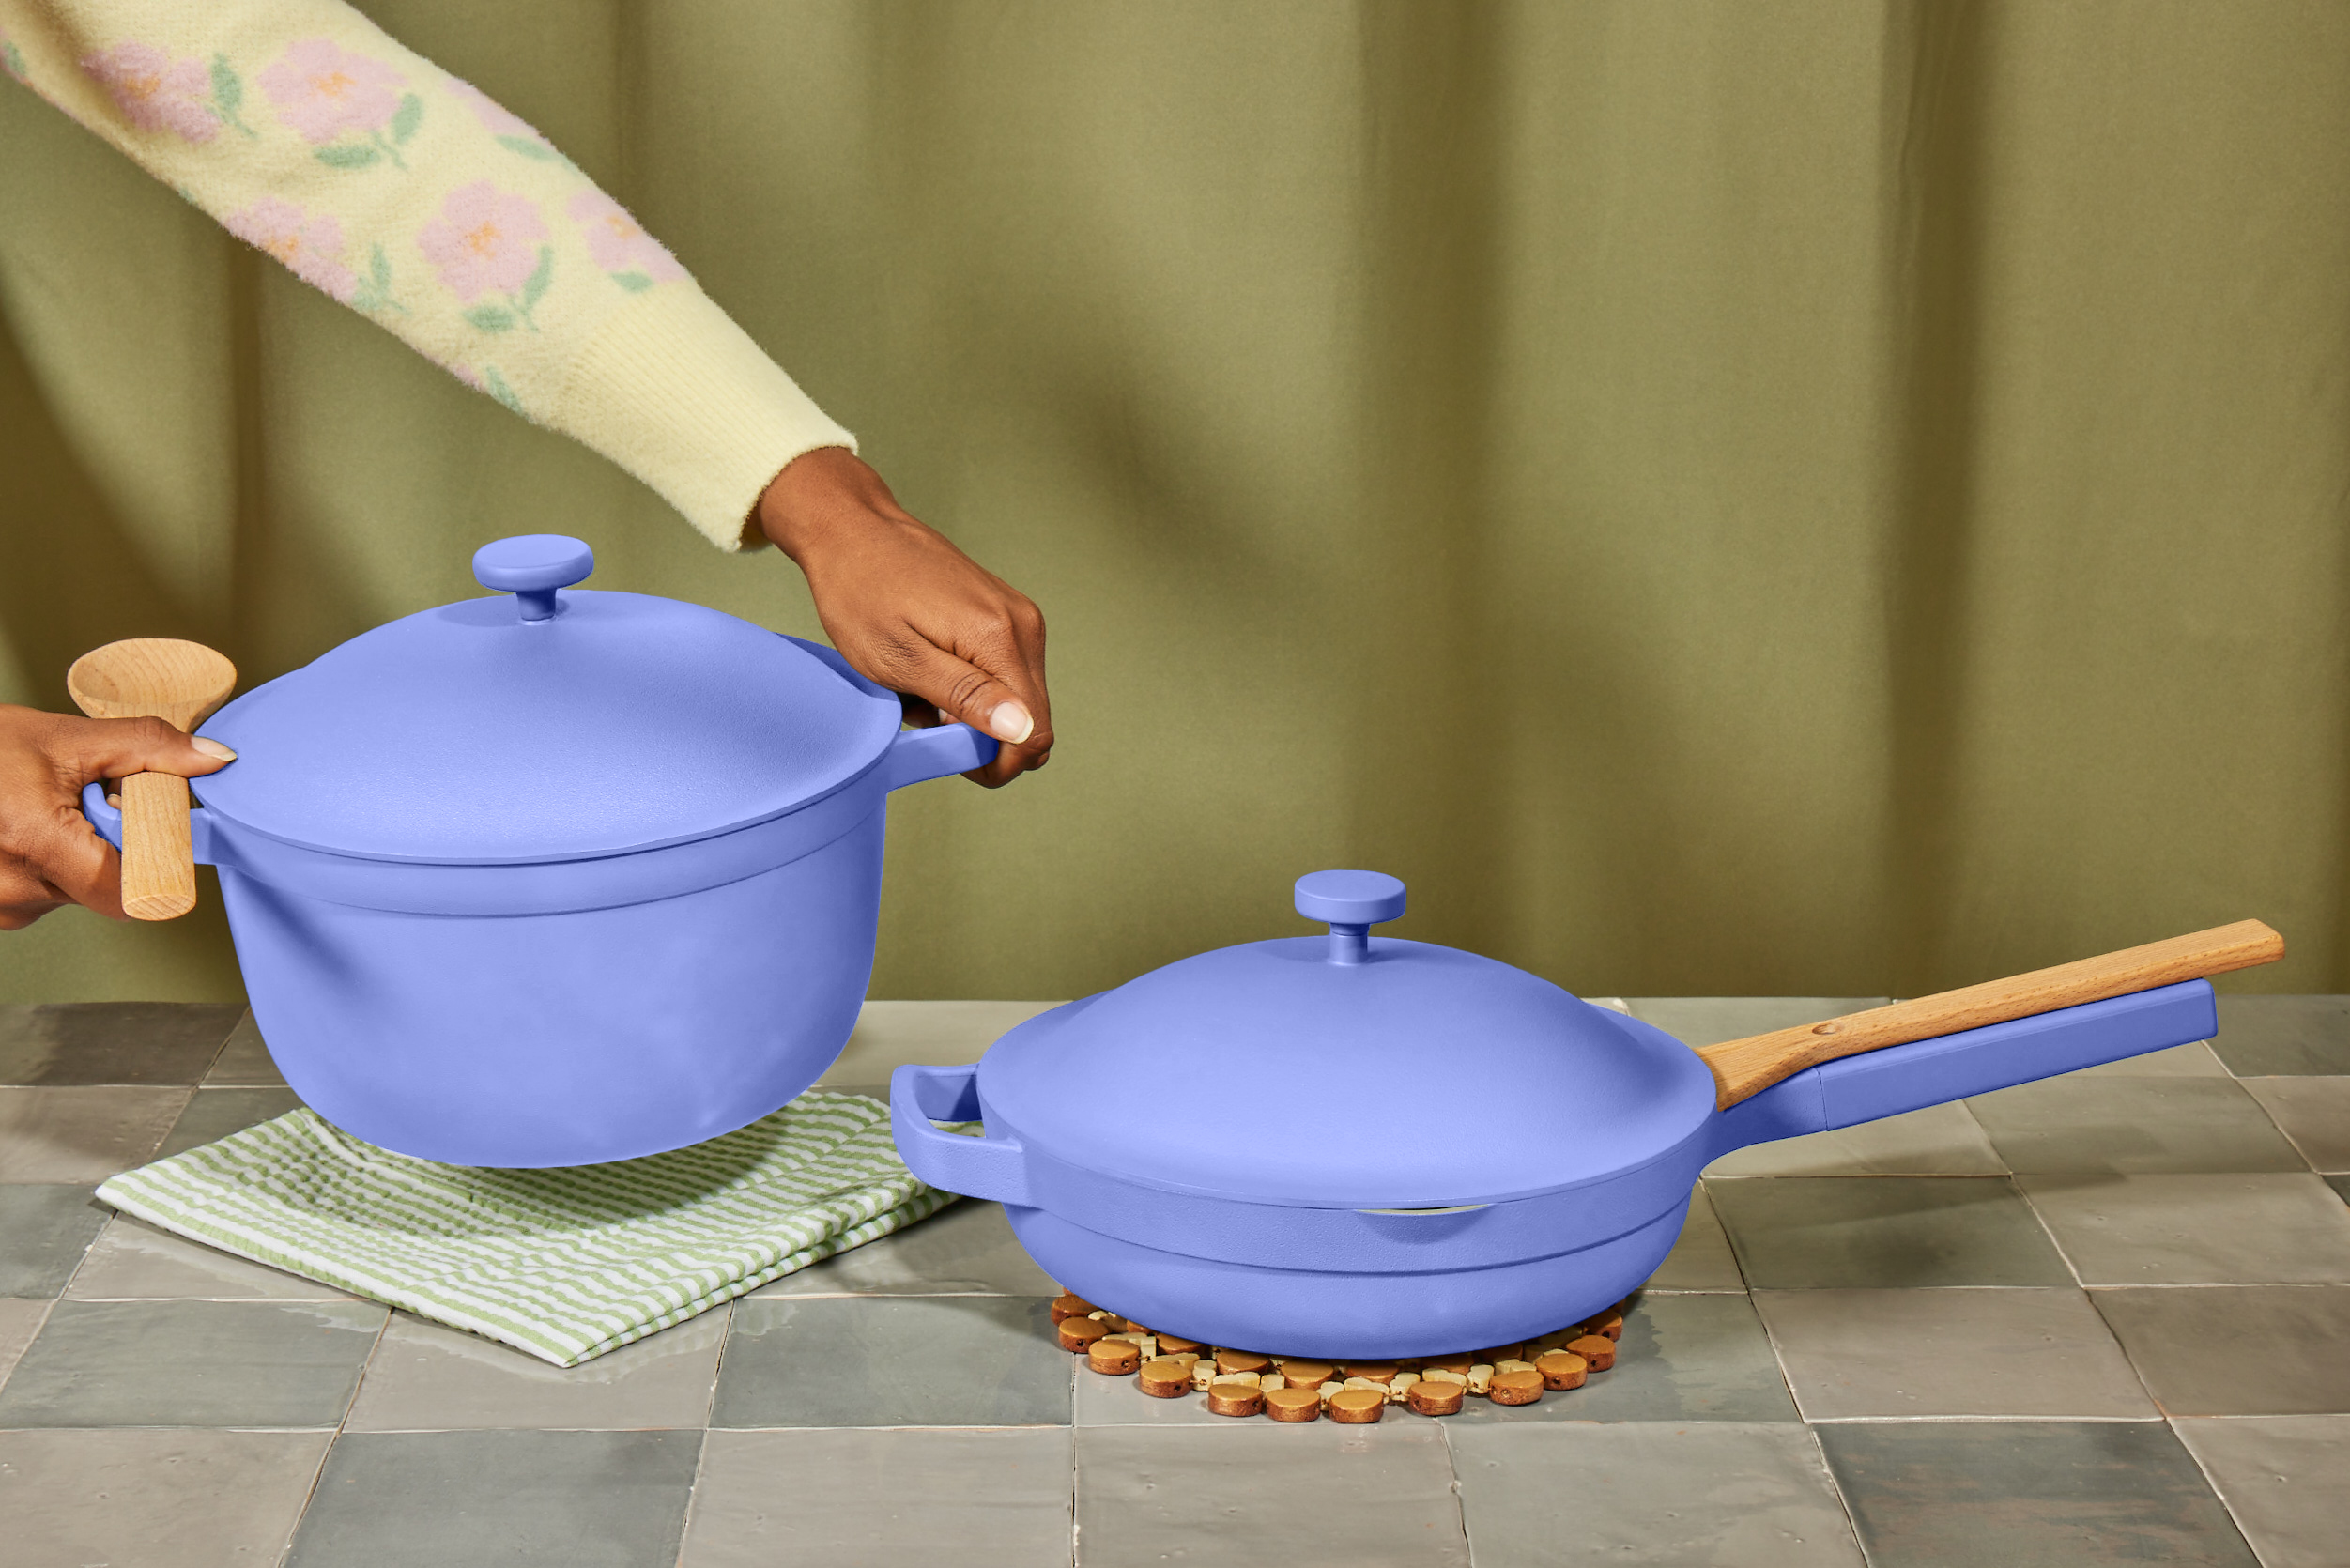 Our Place's New Aura Colorway Will Grace Your Kitchen Like a Periwinkle  Dream